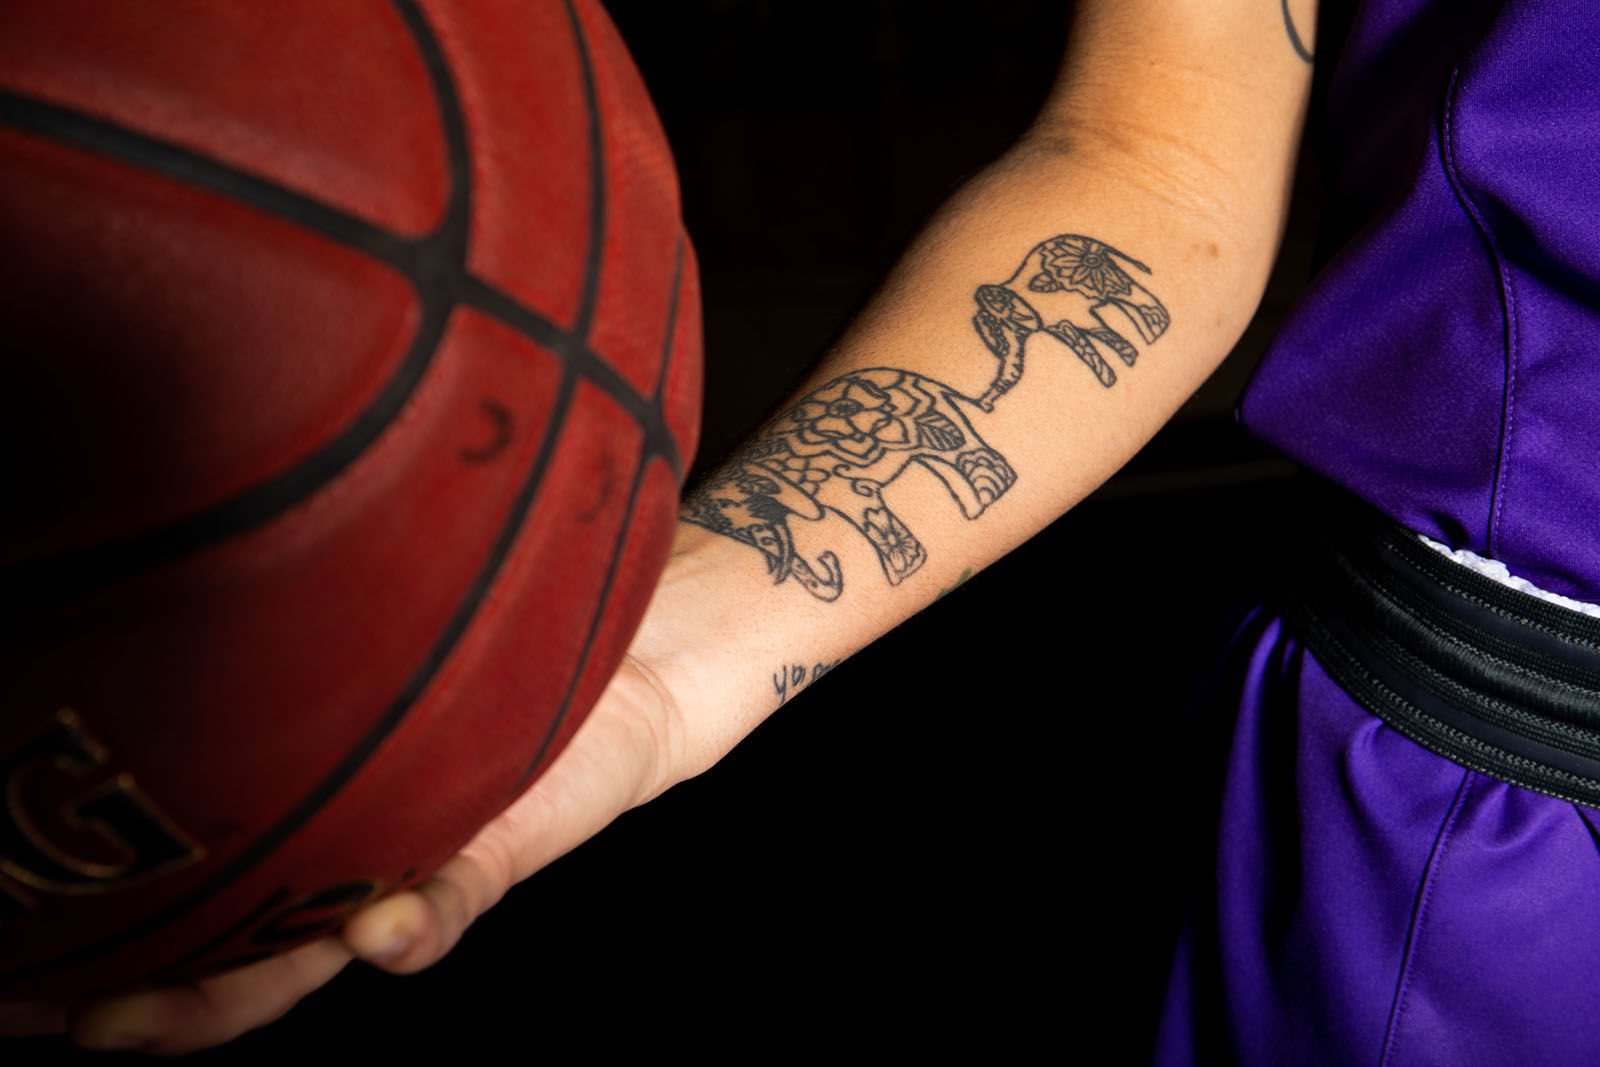 101 Best Basketball Sleeve Tattoo Ideas That Will Blow Your Mind!